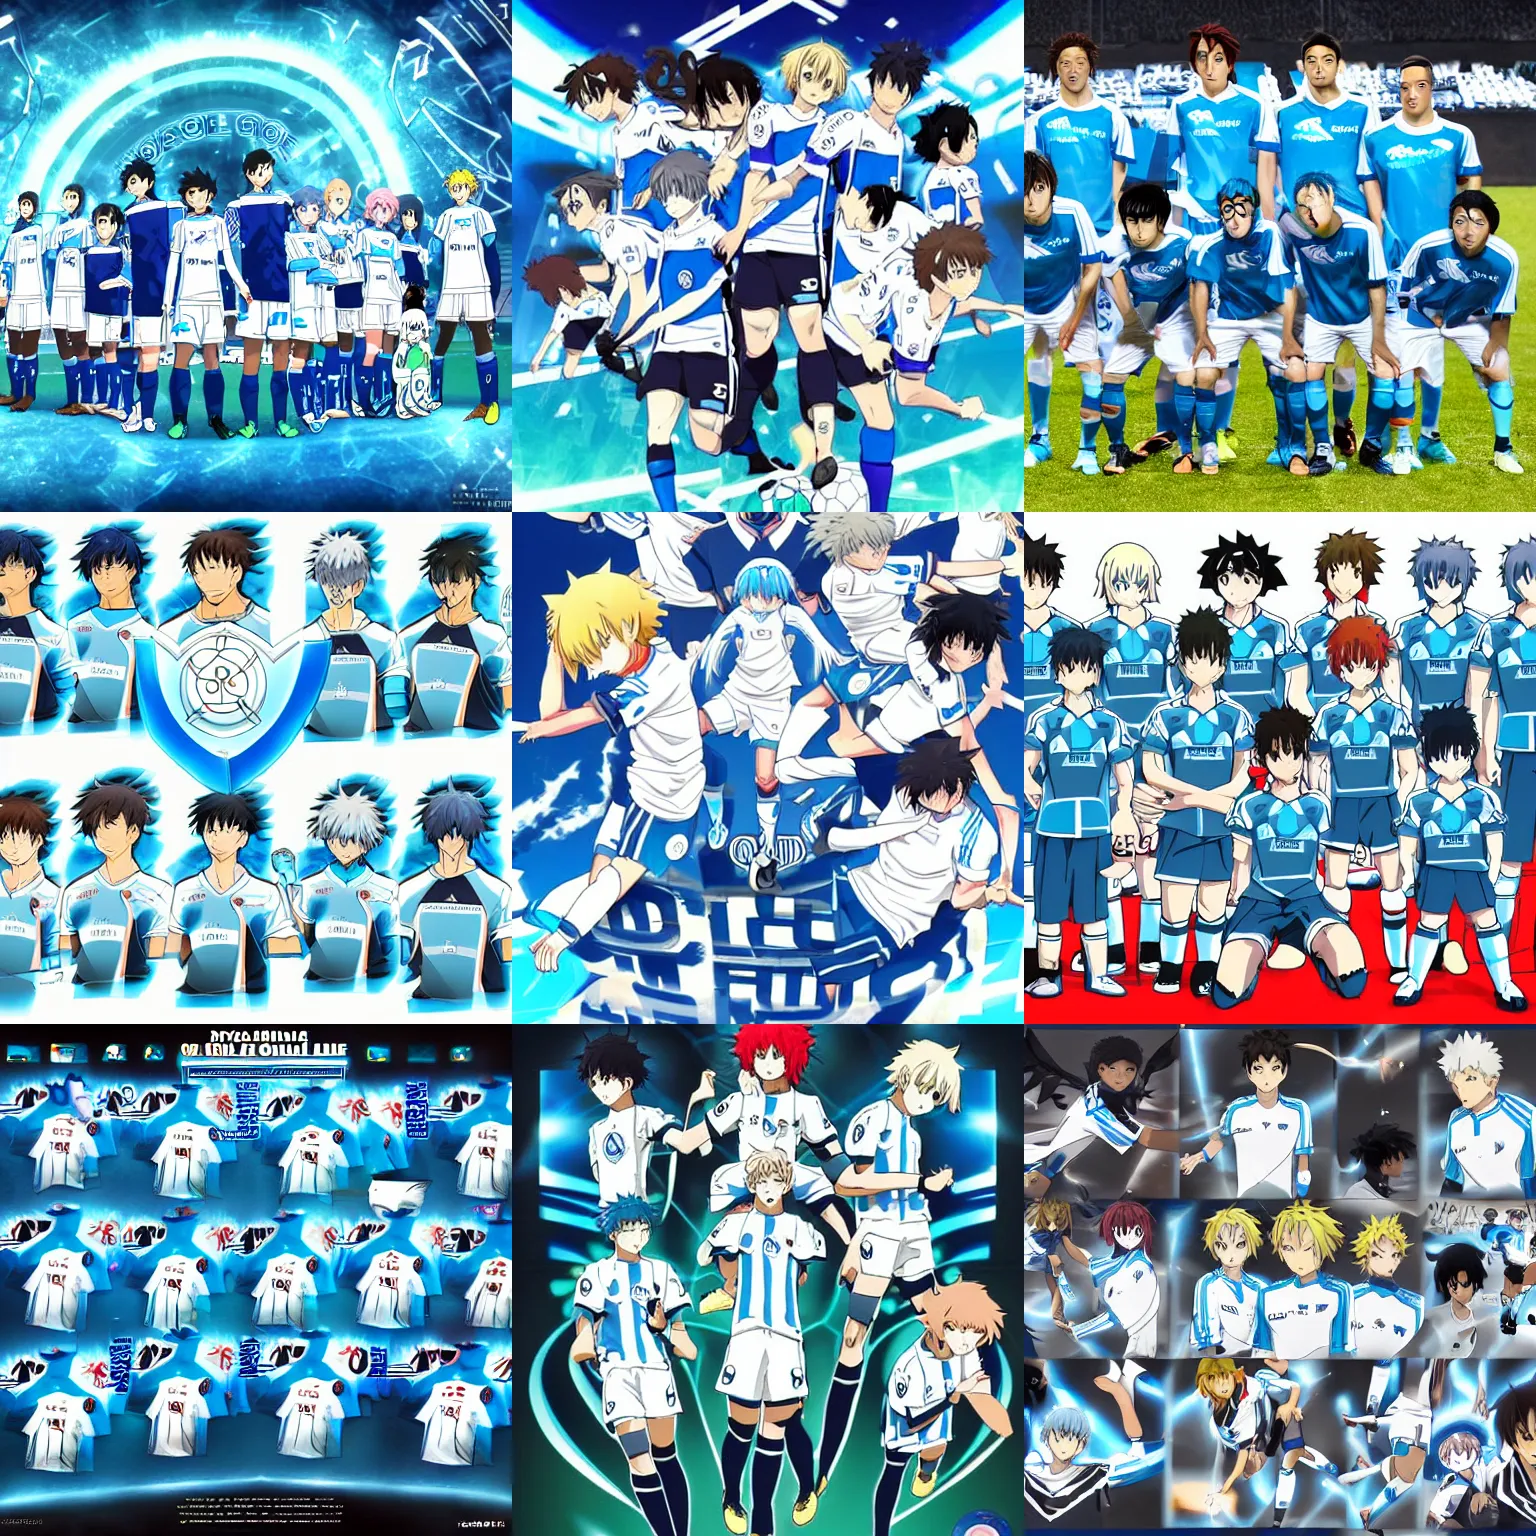 Prompt: olympique de marseille soccer team, anime style like fate/stay night and pokemon manga style